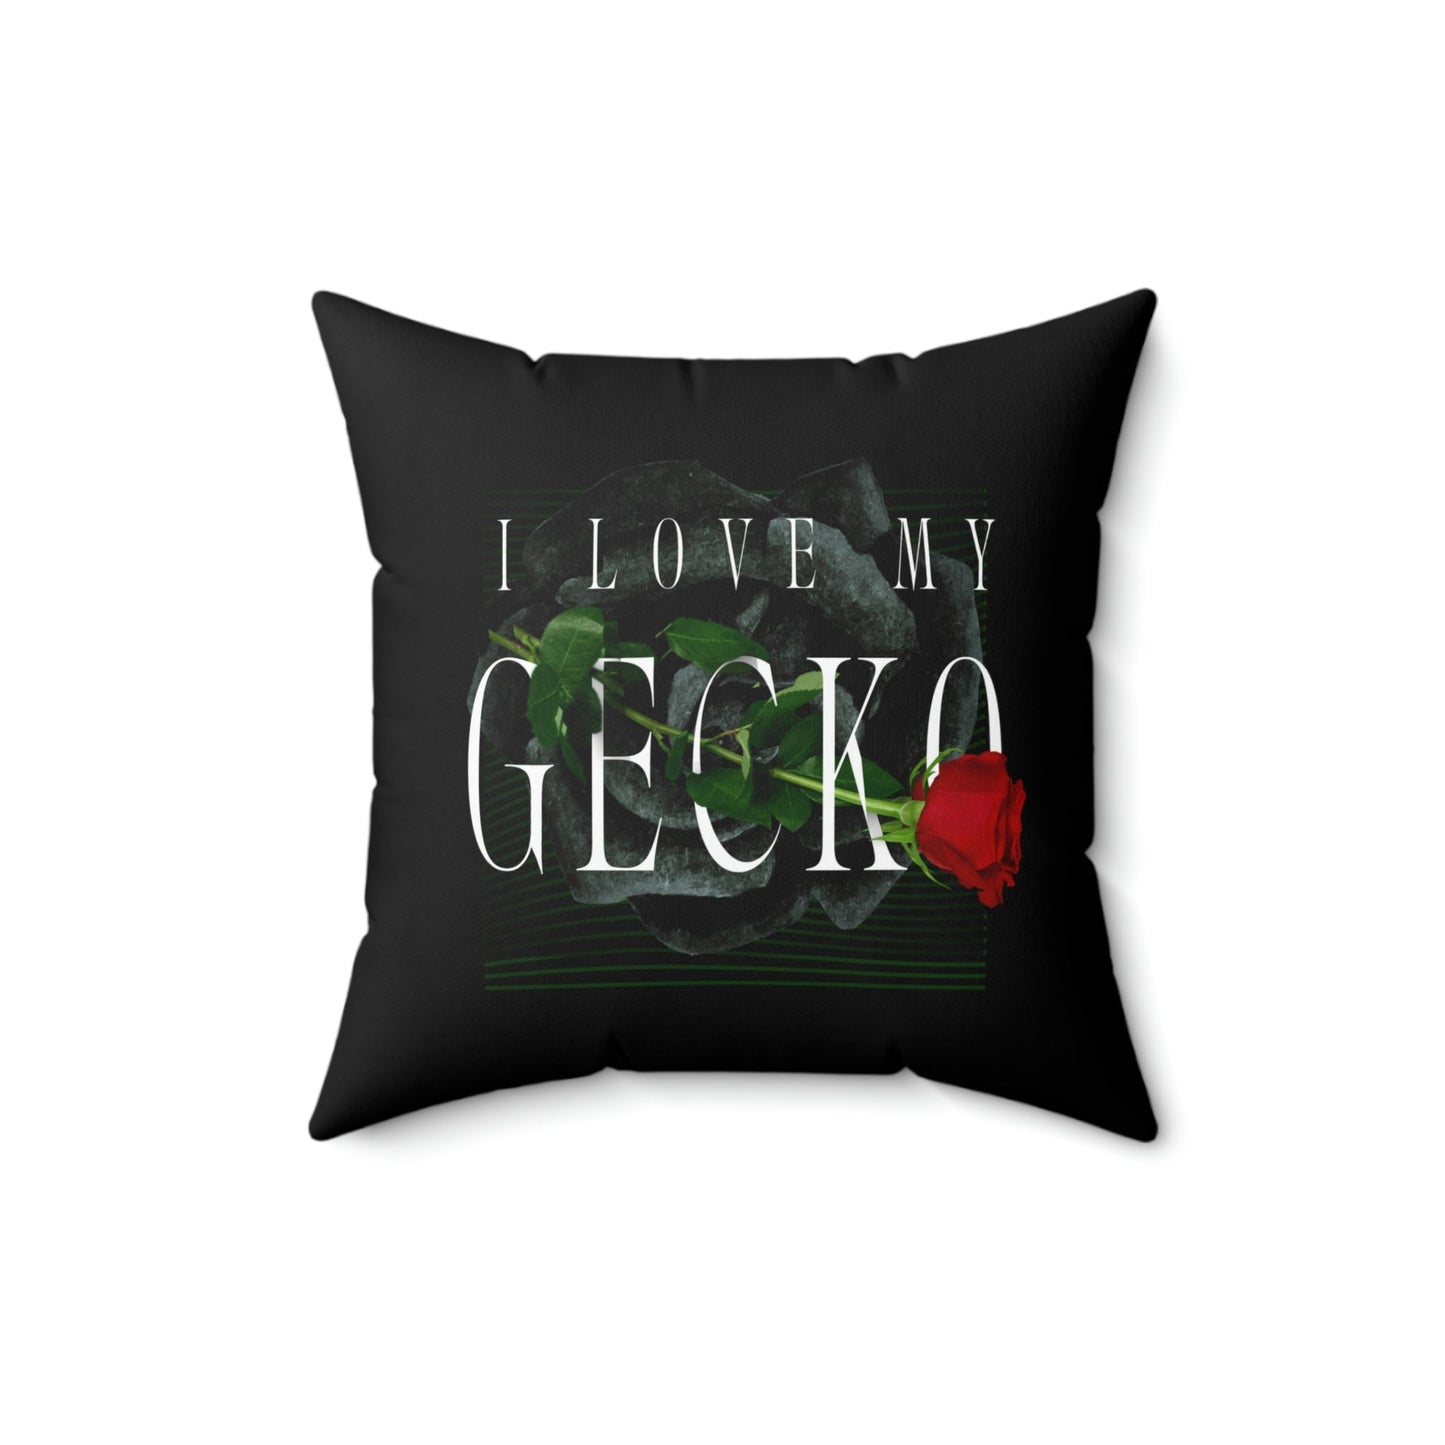 I Love My Gecko Rose Square Pillow